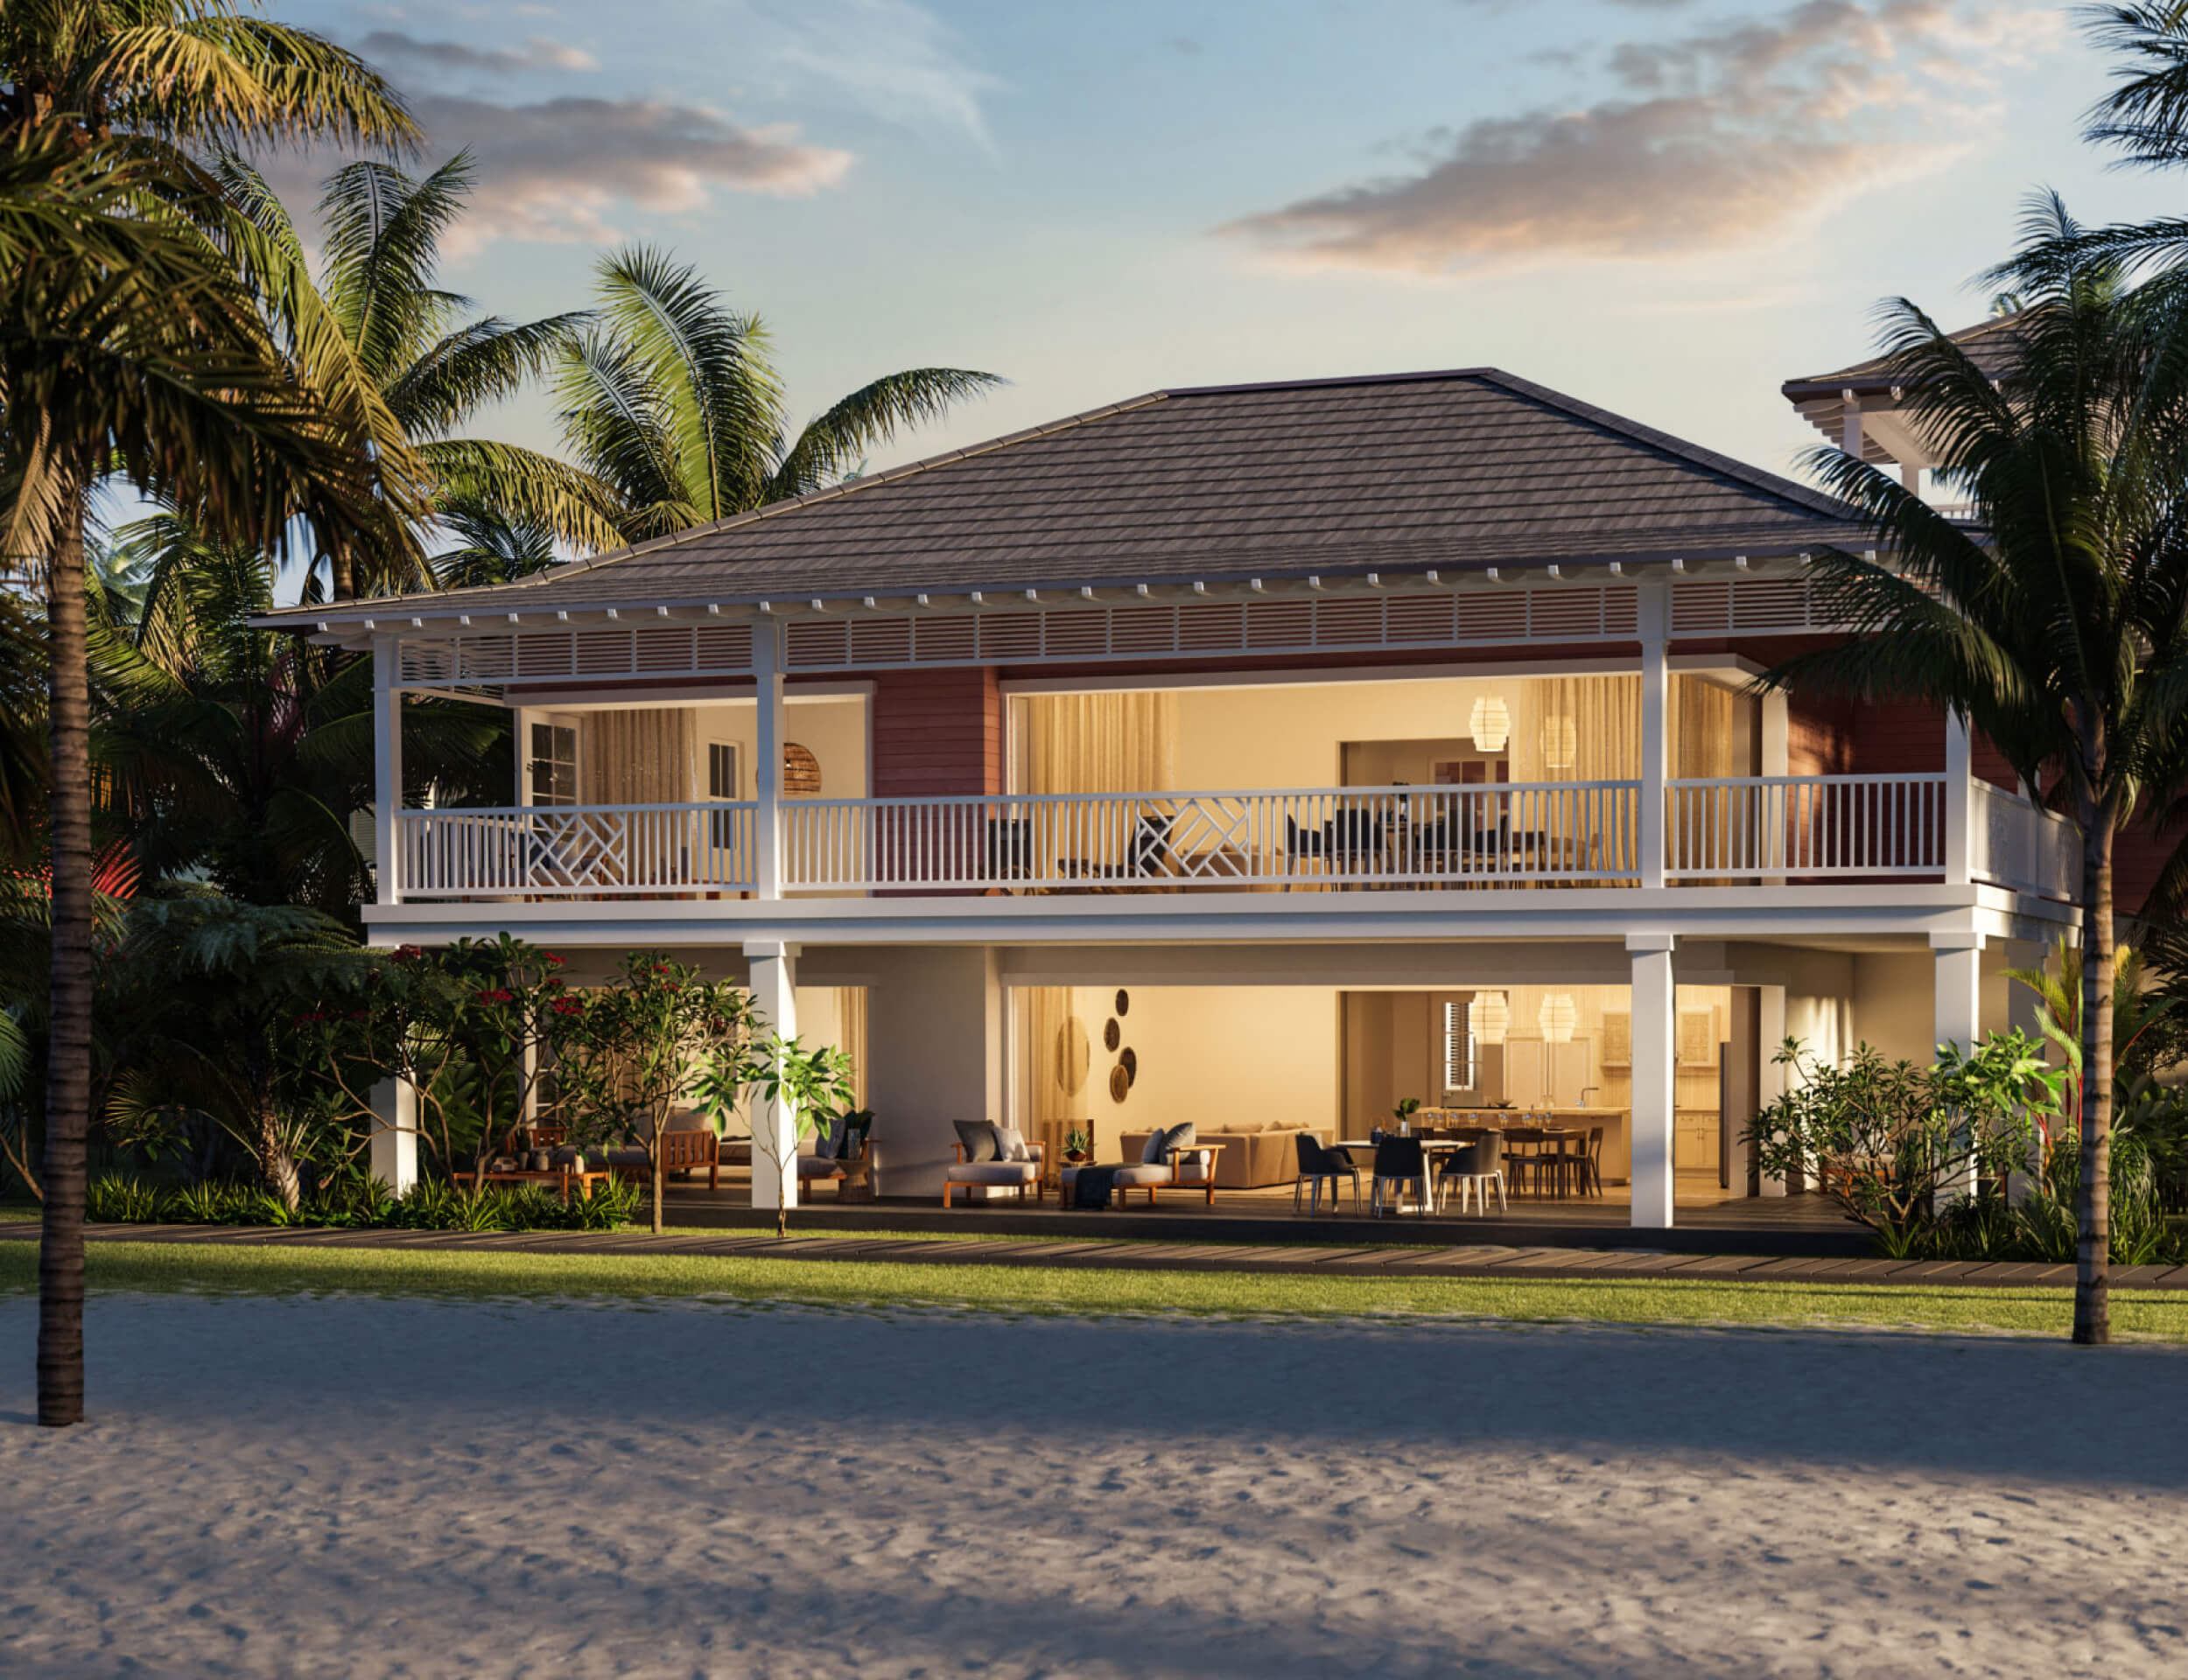 A house in The Cays, a neighborhood in The Abaco Club